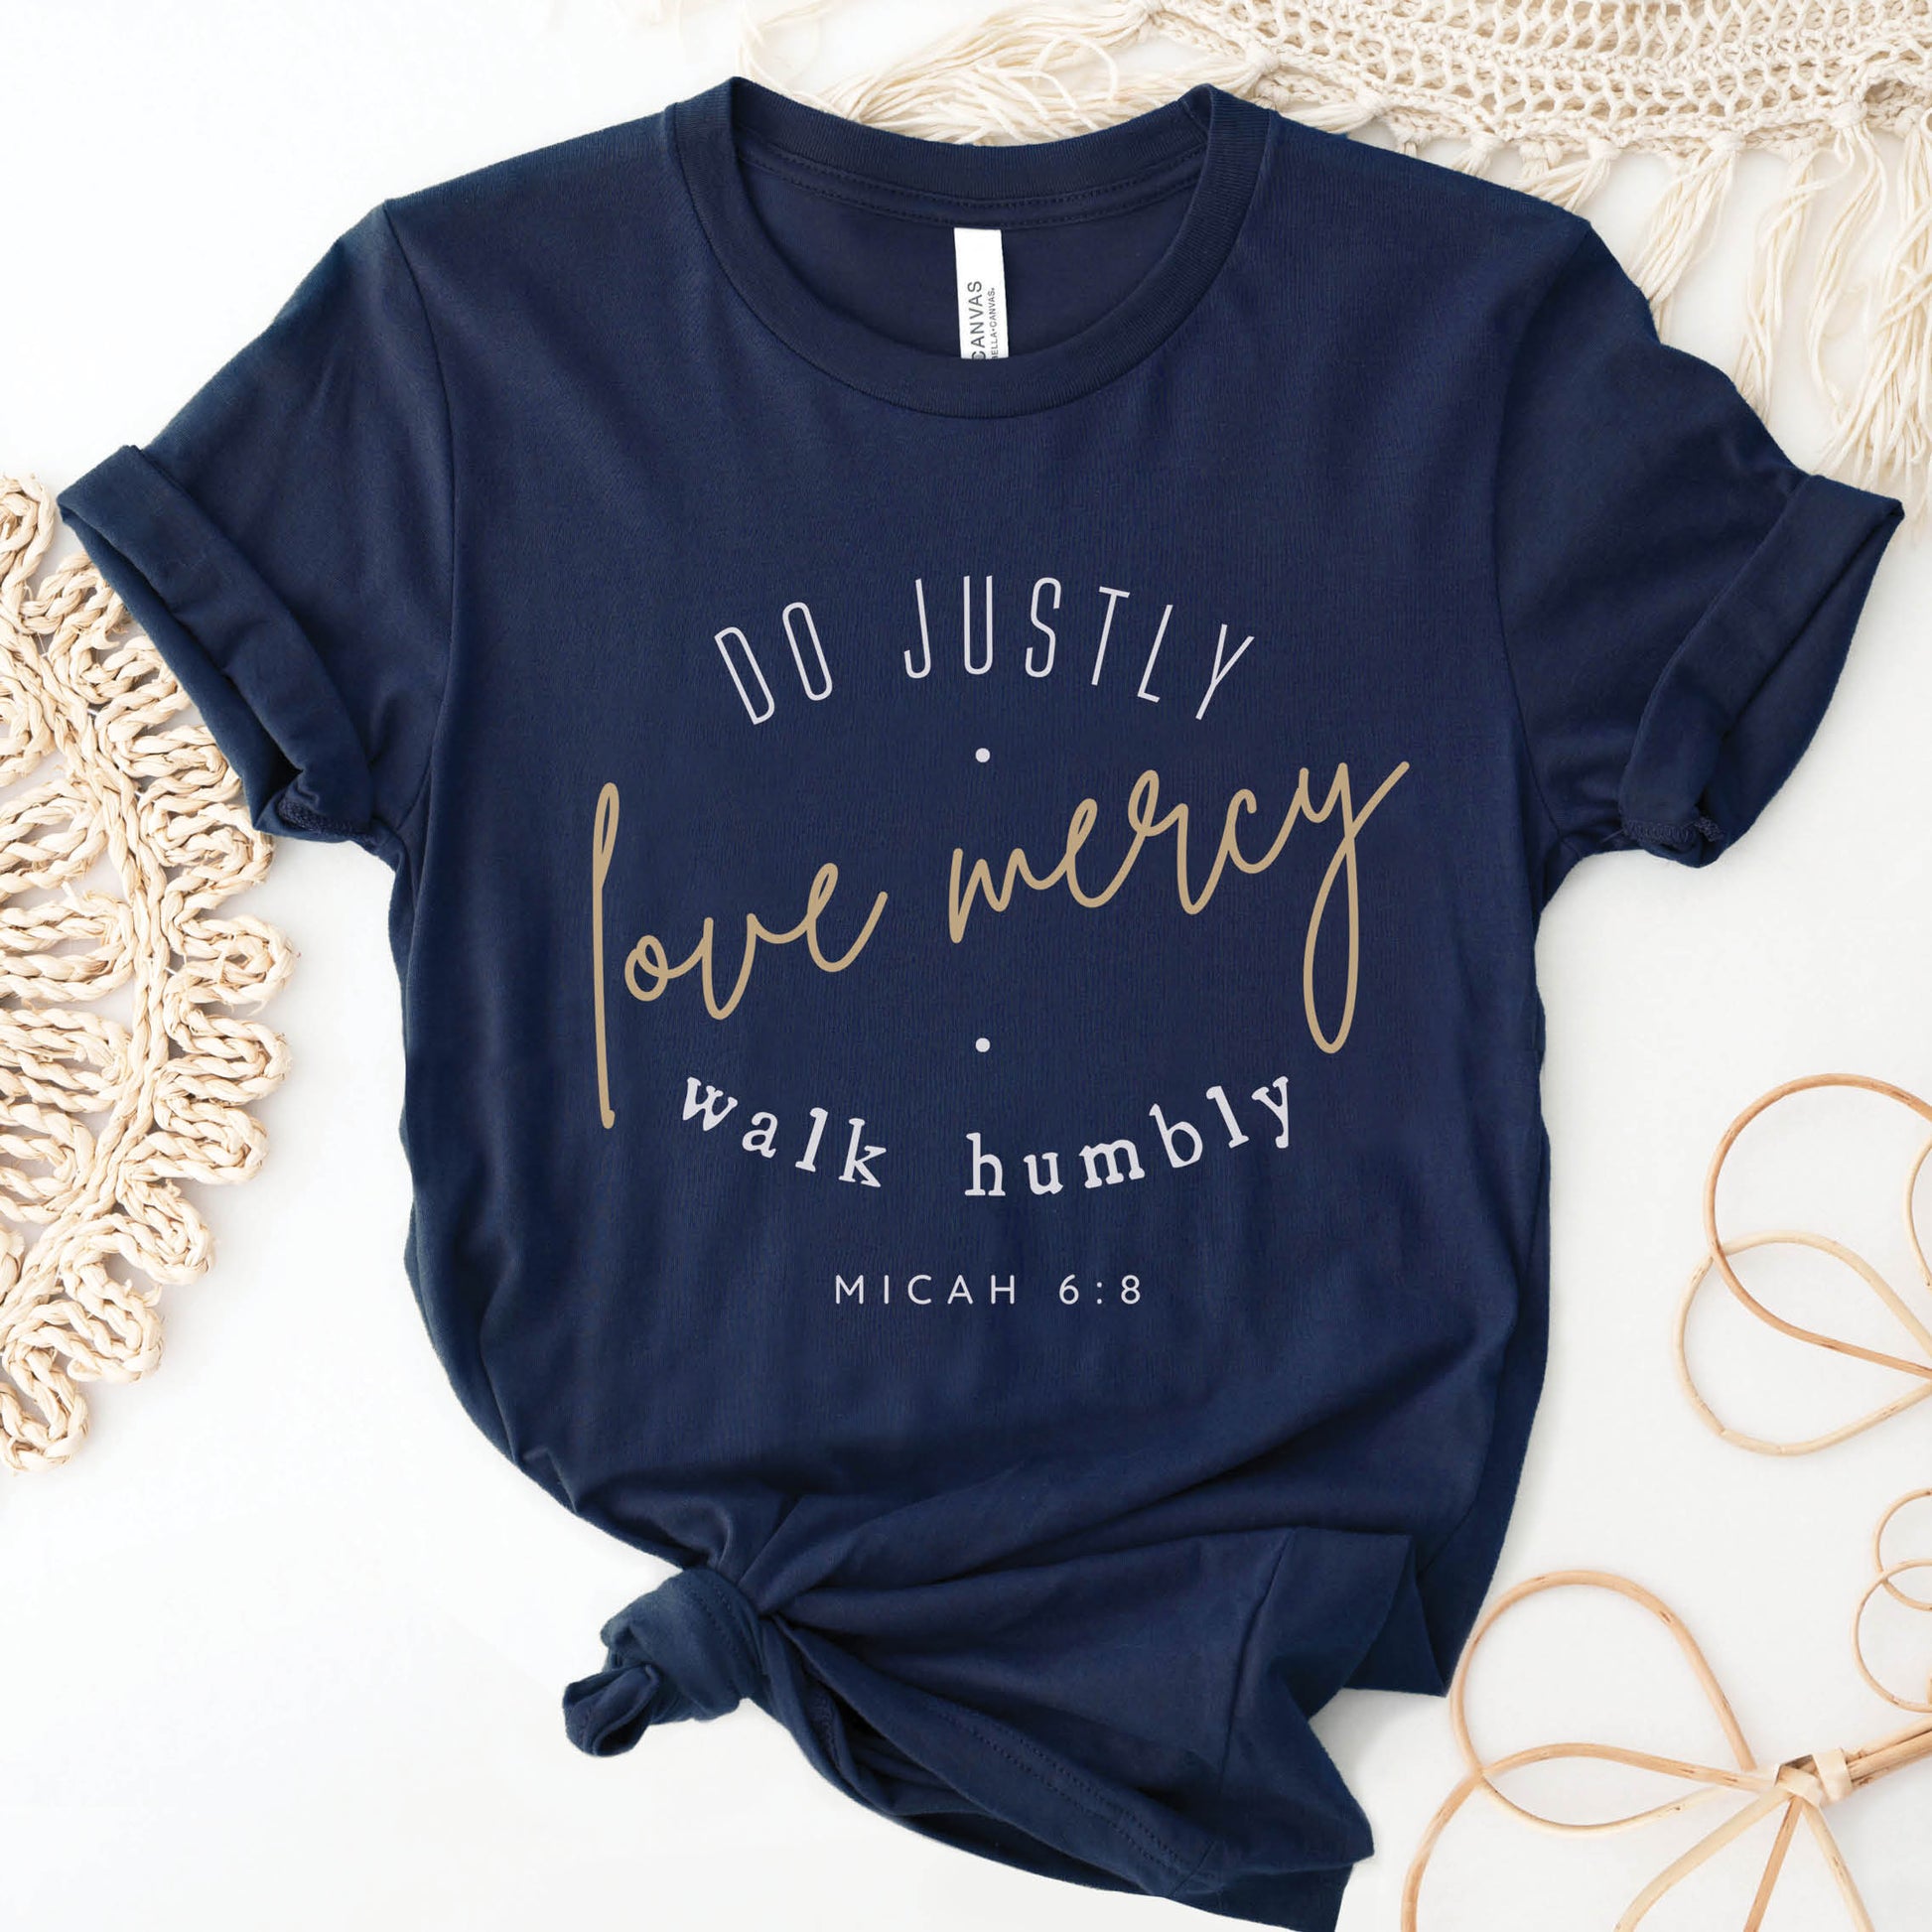 Navy Blue Christian aesthetic faith-based unisex t-shirt for women with Micah 6:8 bible verse scripture printed that says, Do Justly Love Mercy walk humbly in gold and white, designed for women in sizes small thru 4X